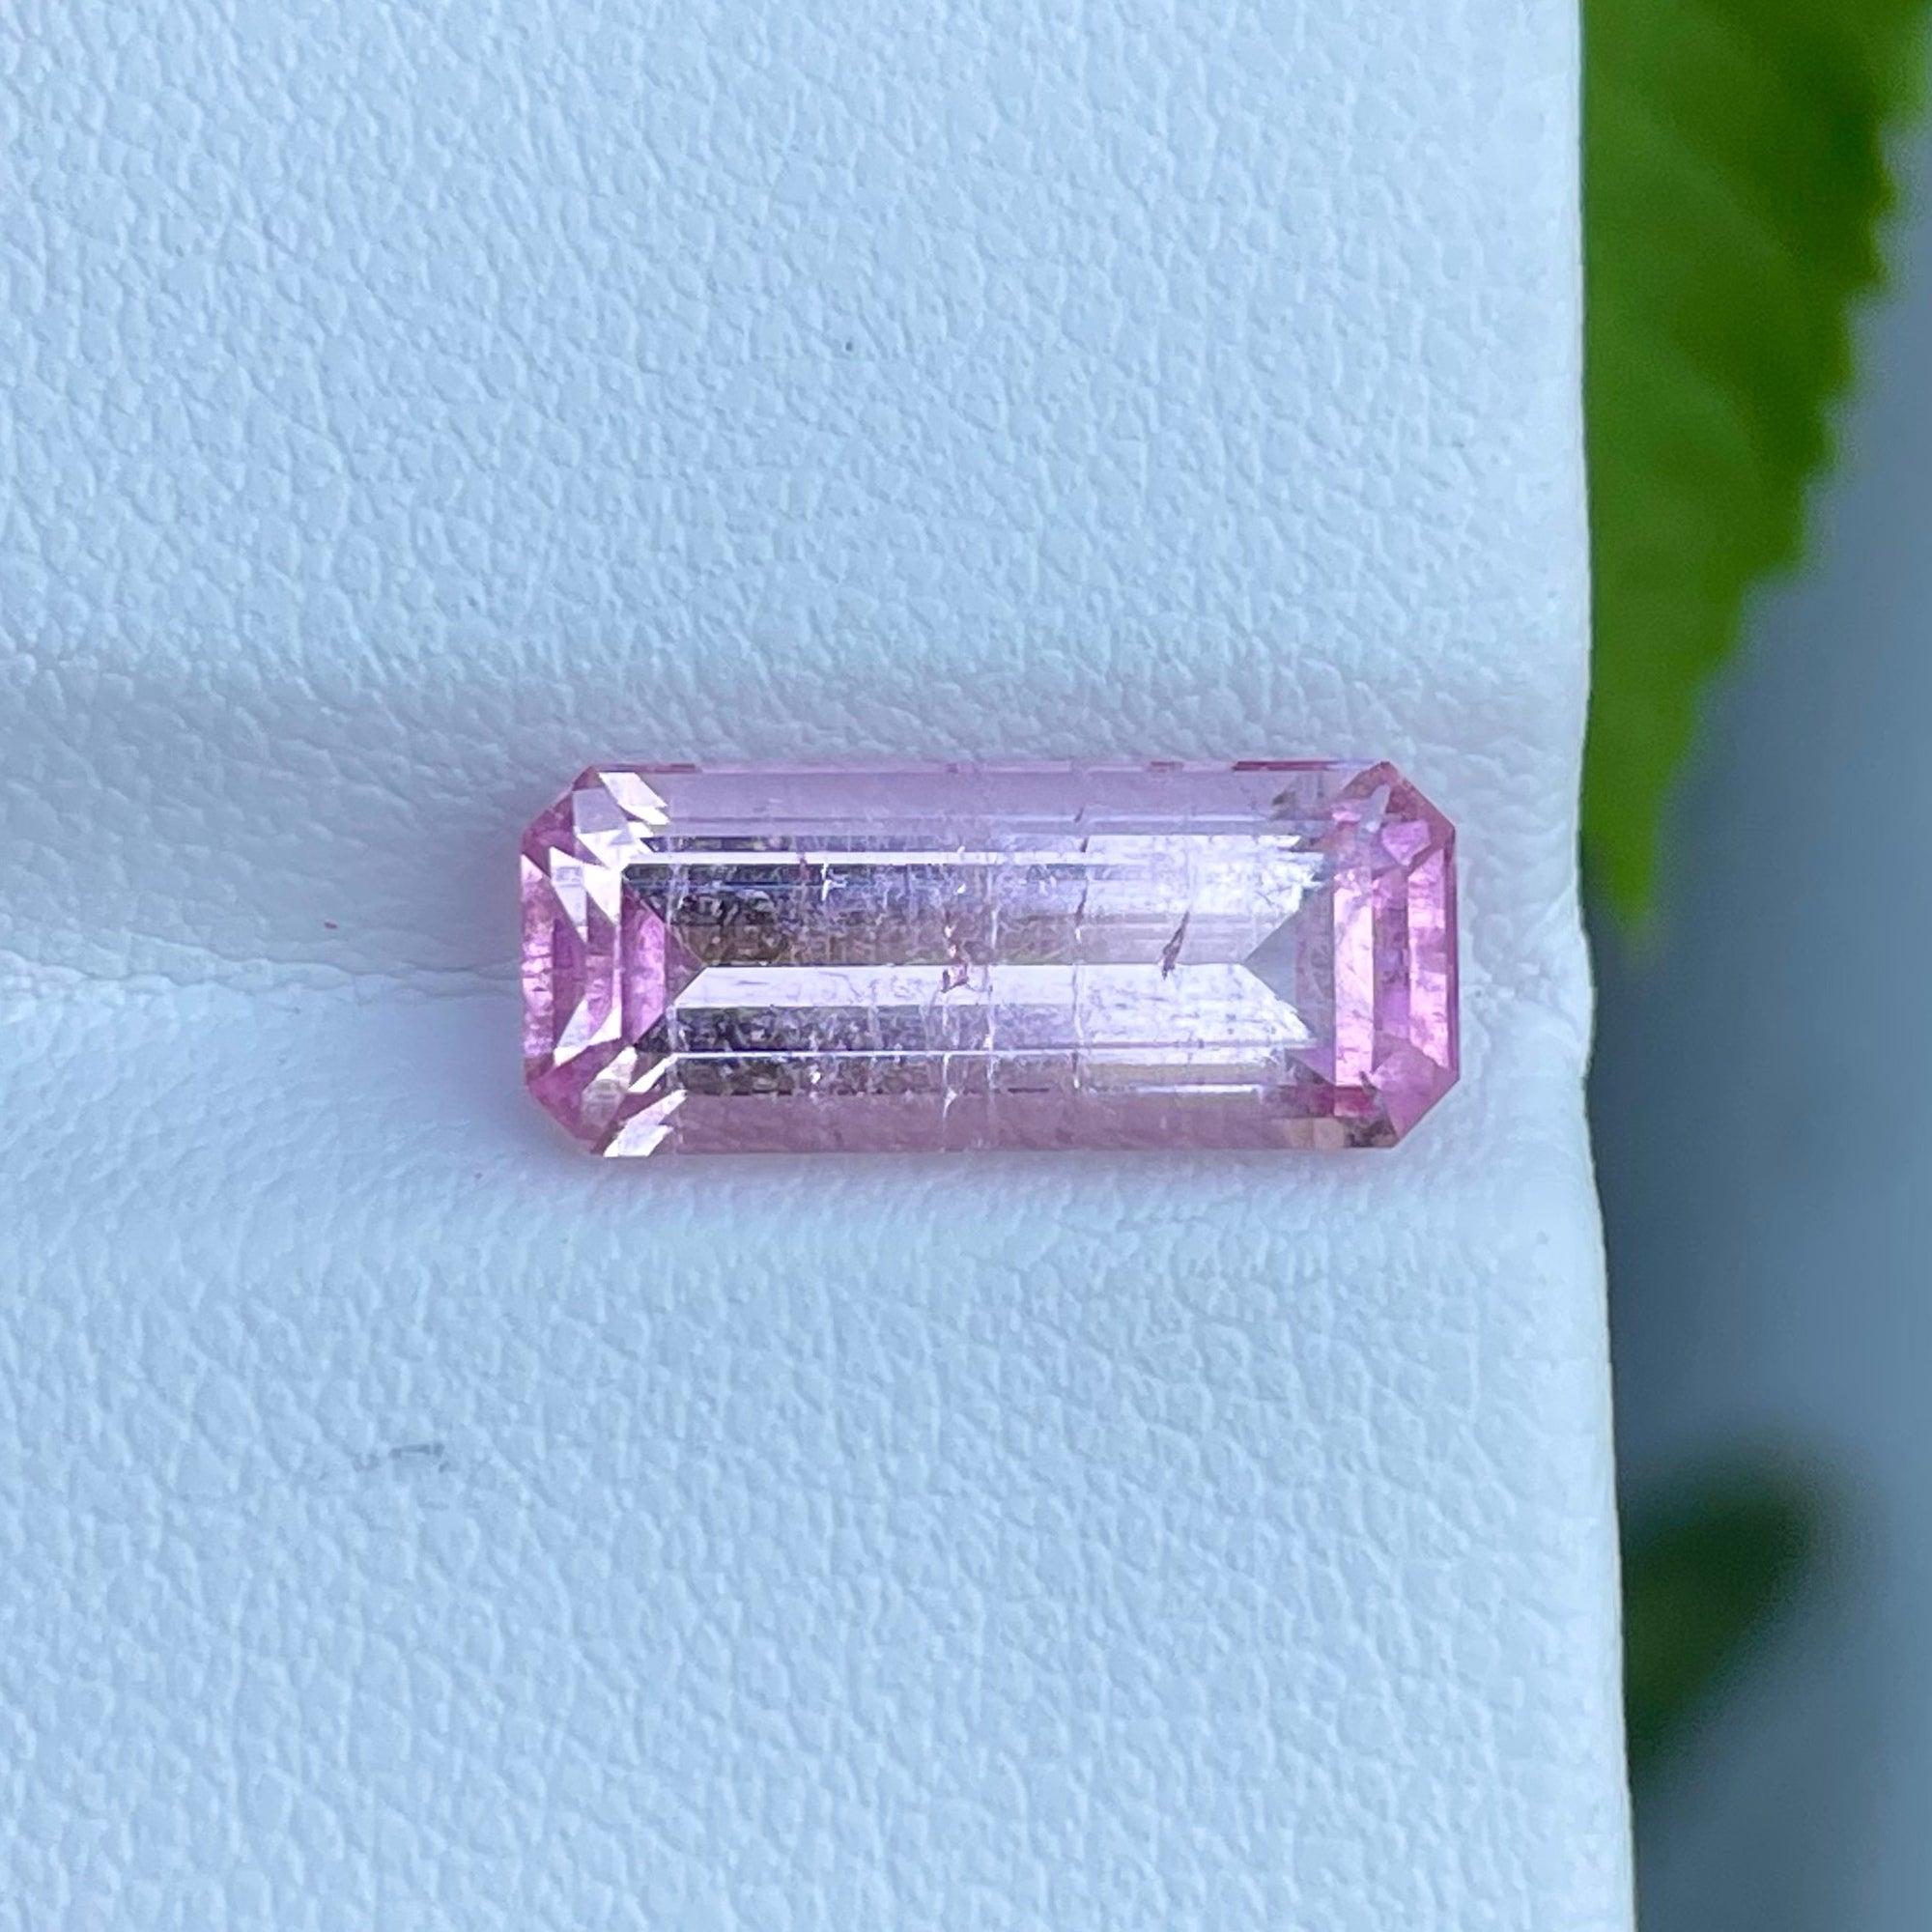 Lovely Sweet Pink Tourmaline Cut Gemstone, Available For Sale At Wholesale Price Natural High Quality 5.05 Carats SI Clarity Unheated Tourmaline From Afghanistan.

Product Information:
GEMSTONE TYPE:	Lovely Sweet Pink Tourmaline Cut